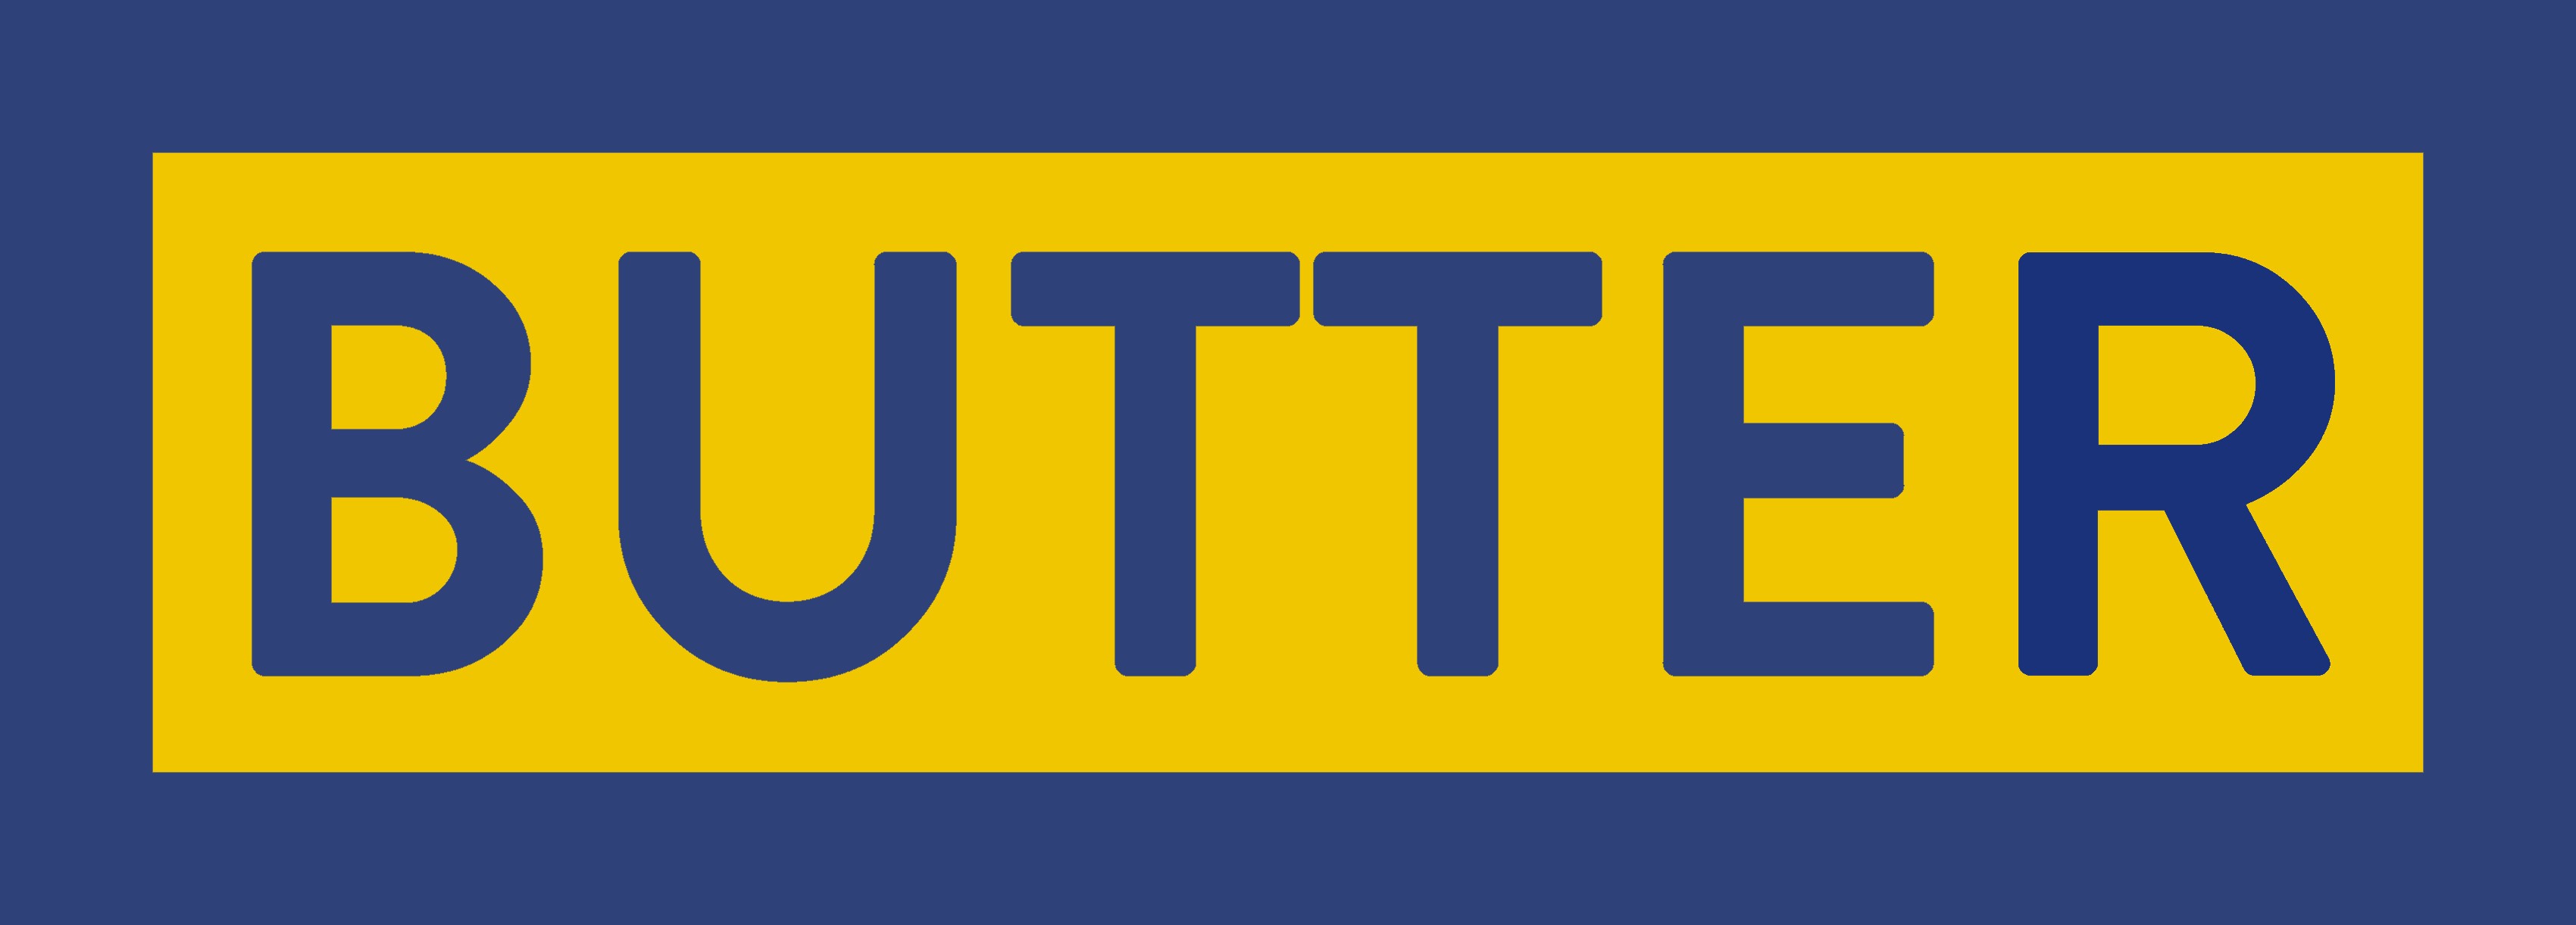 Butter Cafe